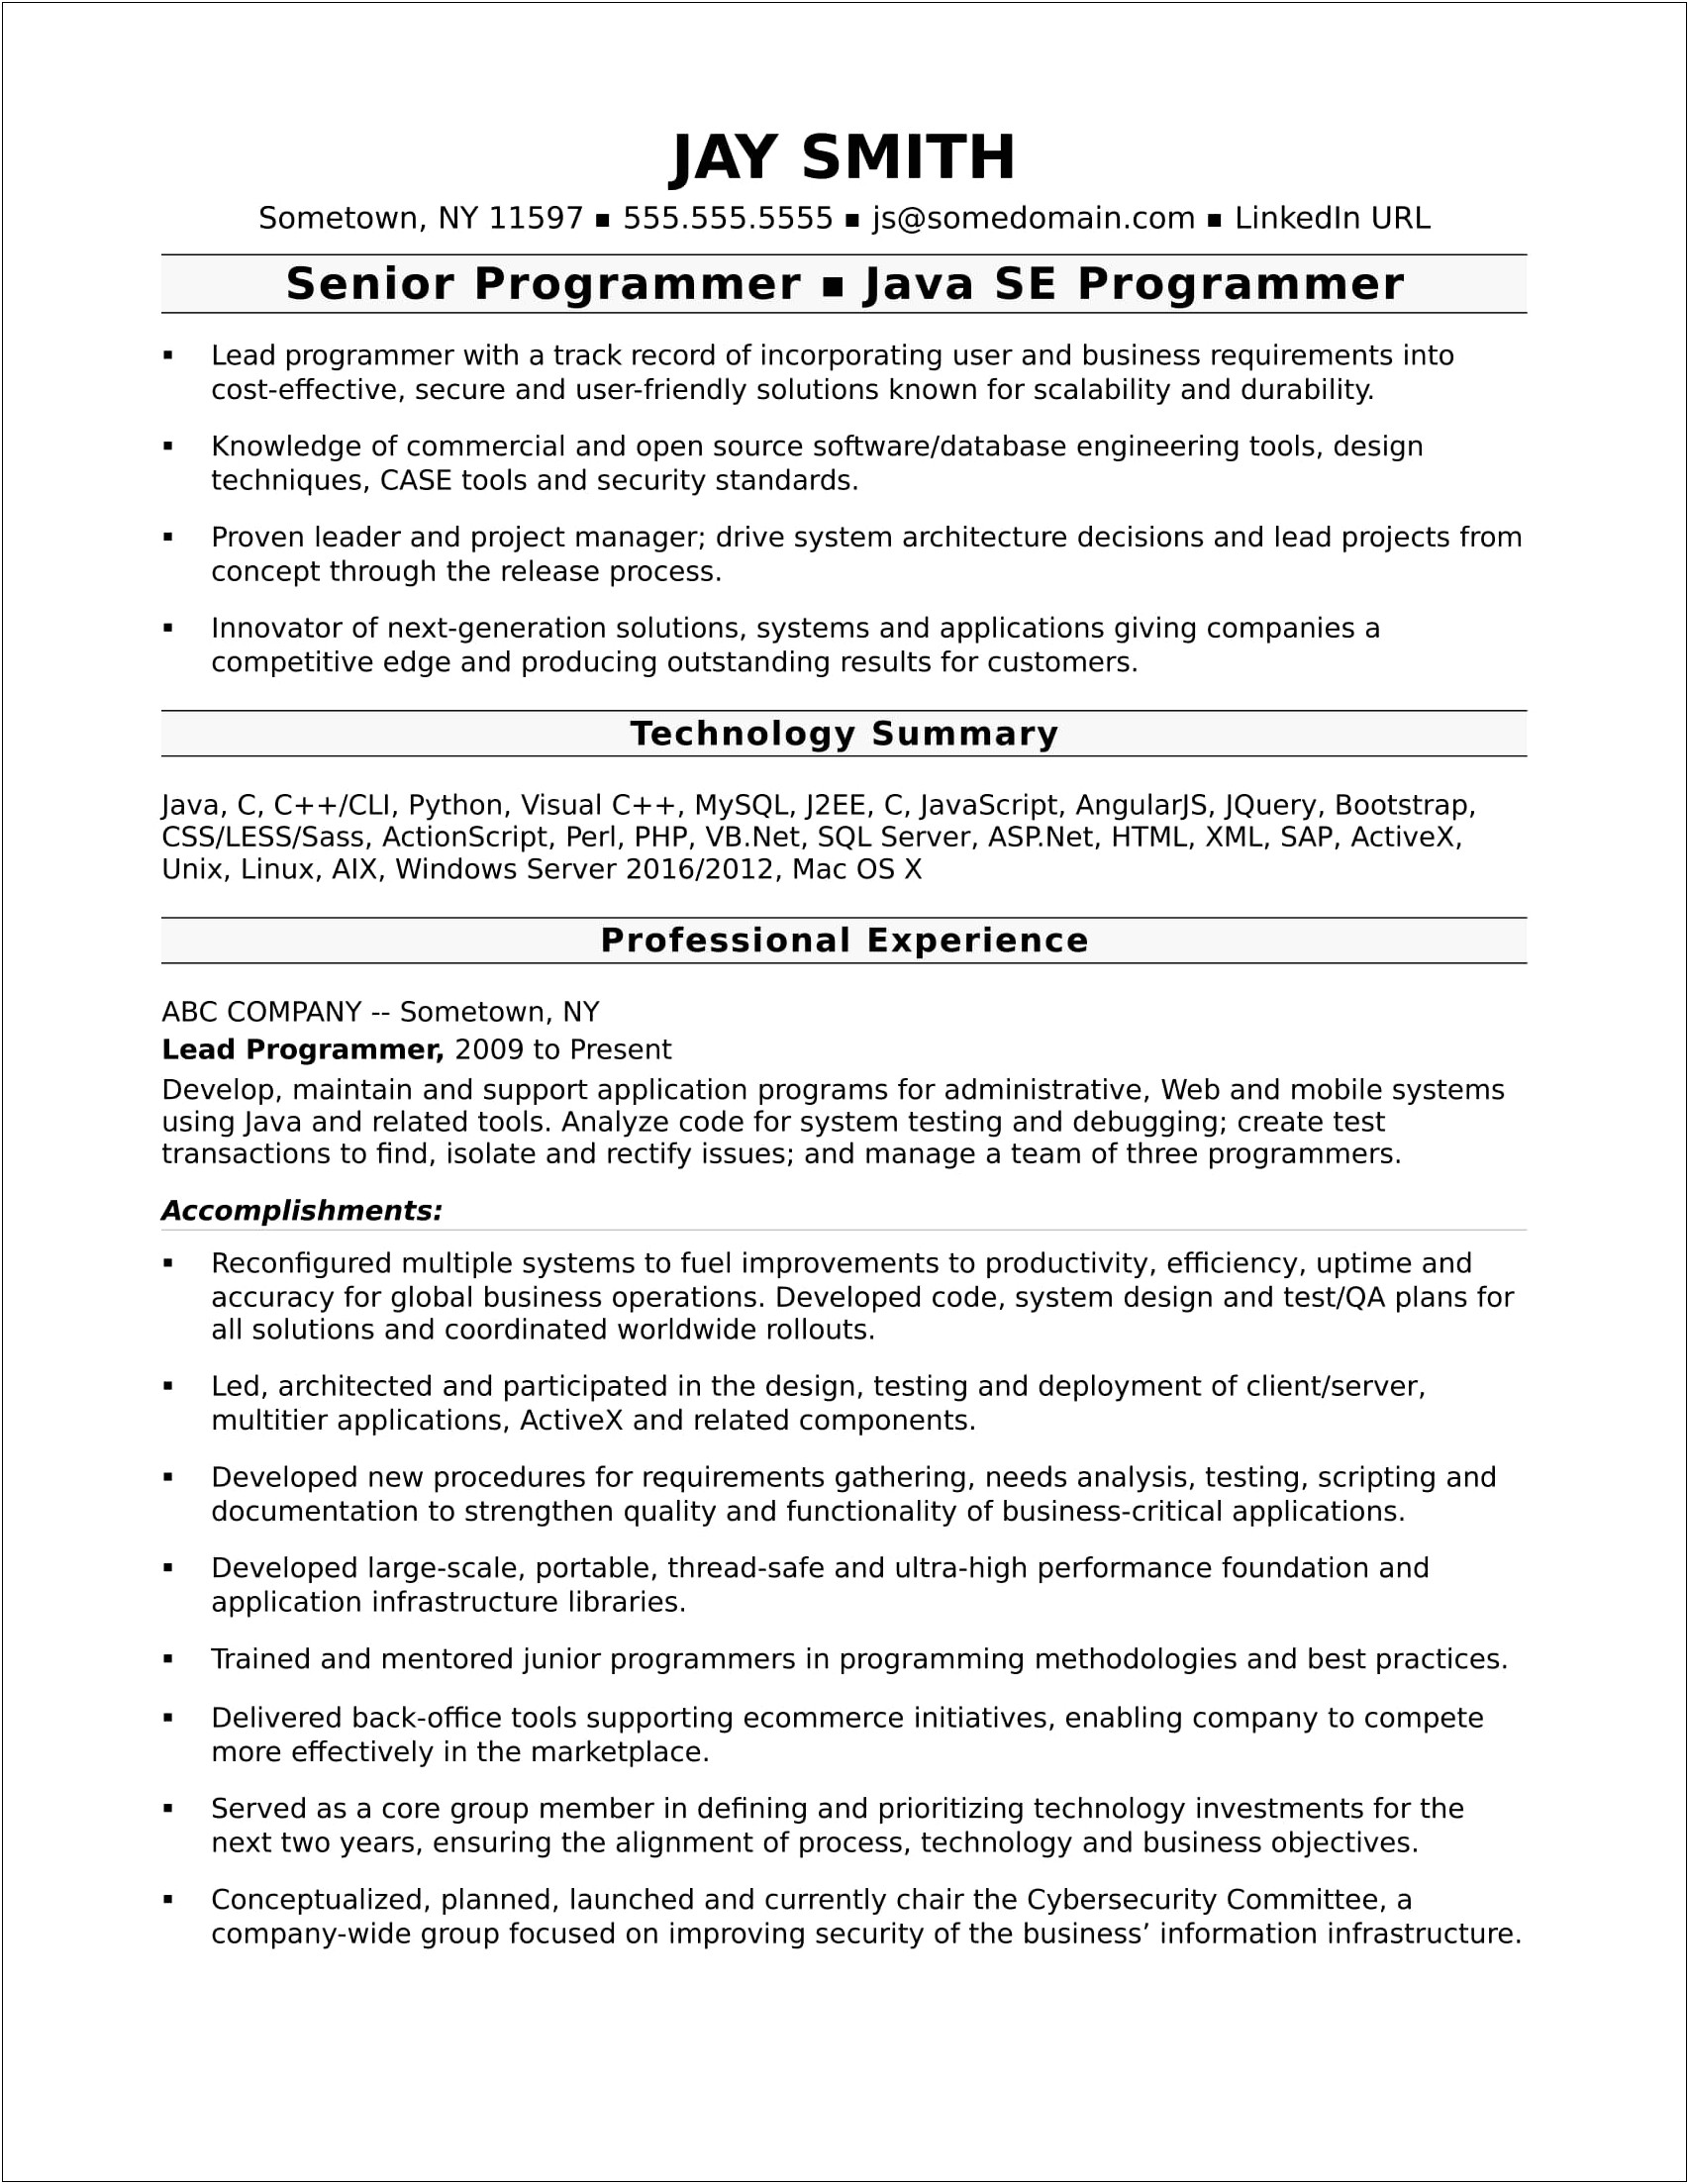 Clinical Programmer Resume 3 Year Experience